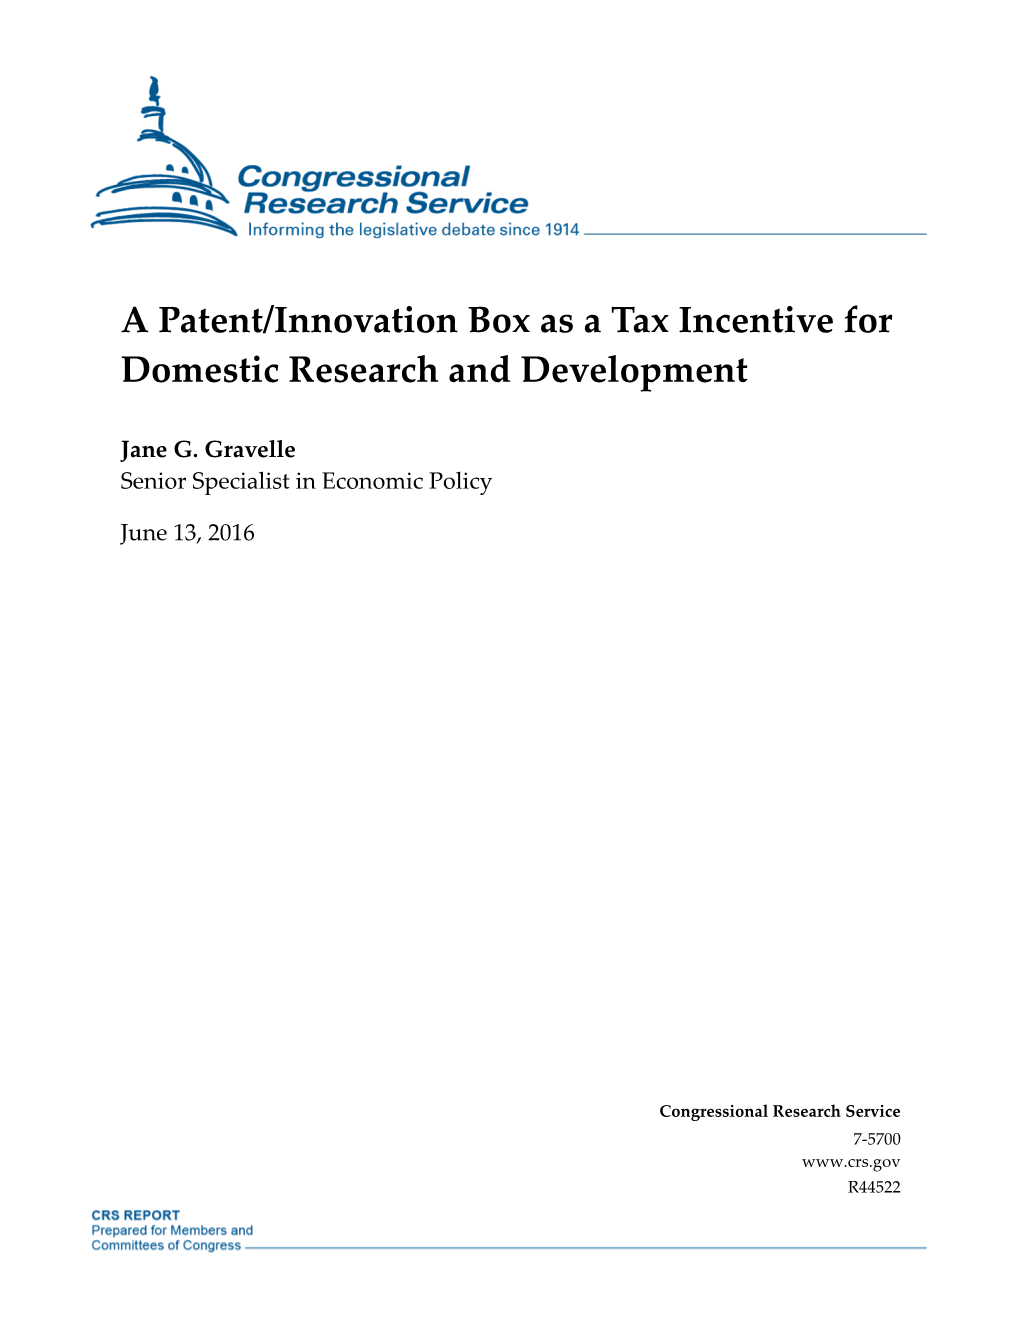 A Patent/Innovation Box As a Tax Incentive for Domestic Research and Development